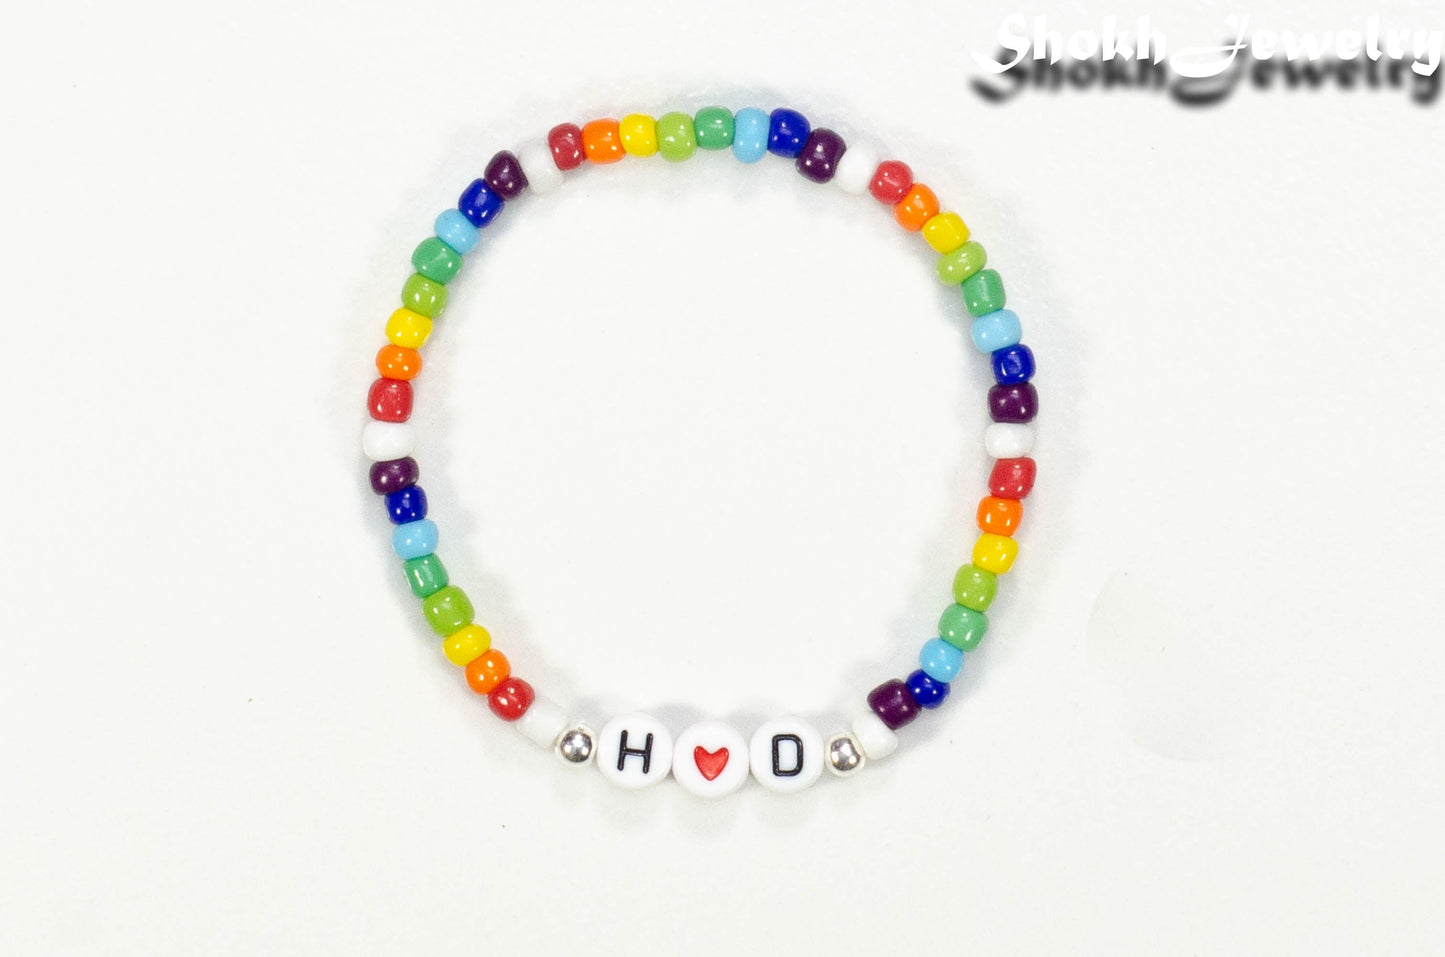 Top view of Rainbow seed beads Bracelet with Initials.